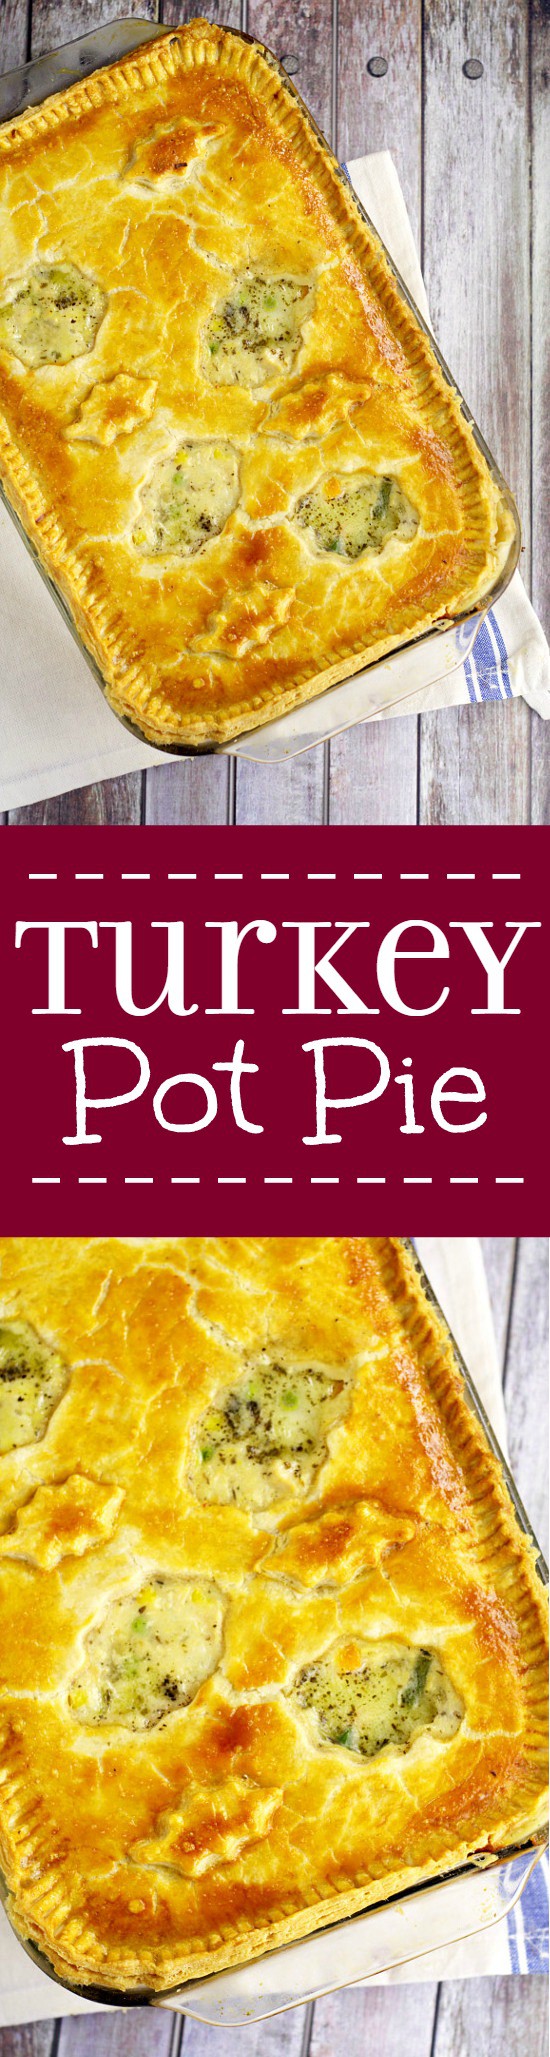 The BEST way to use up leftover turkey is this homemade Turkey Pot Pie recipe with creamy comfort food pot pie filling, turkey, vegetables, and golden flaky crust. Great for a delicious family dinner recipe. Mmmm... Looks delicious!